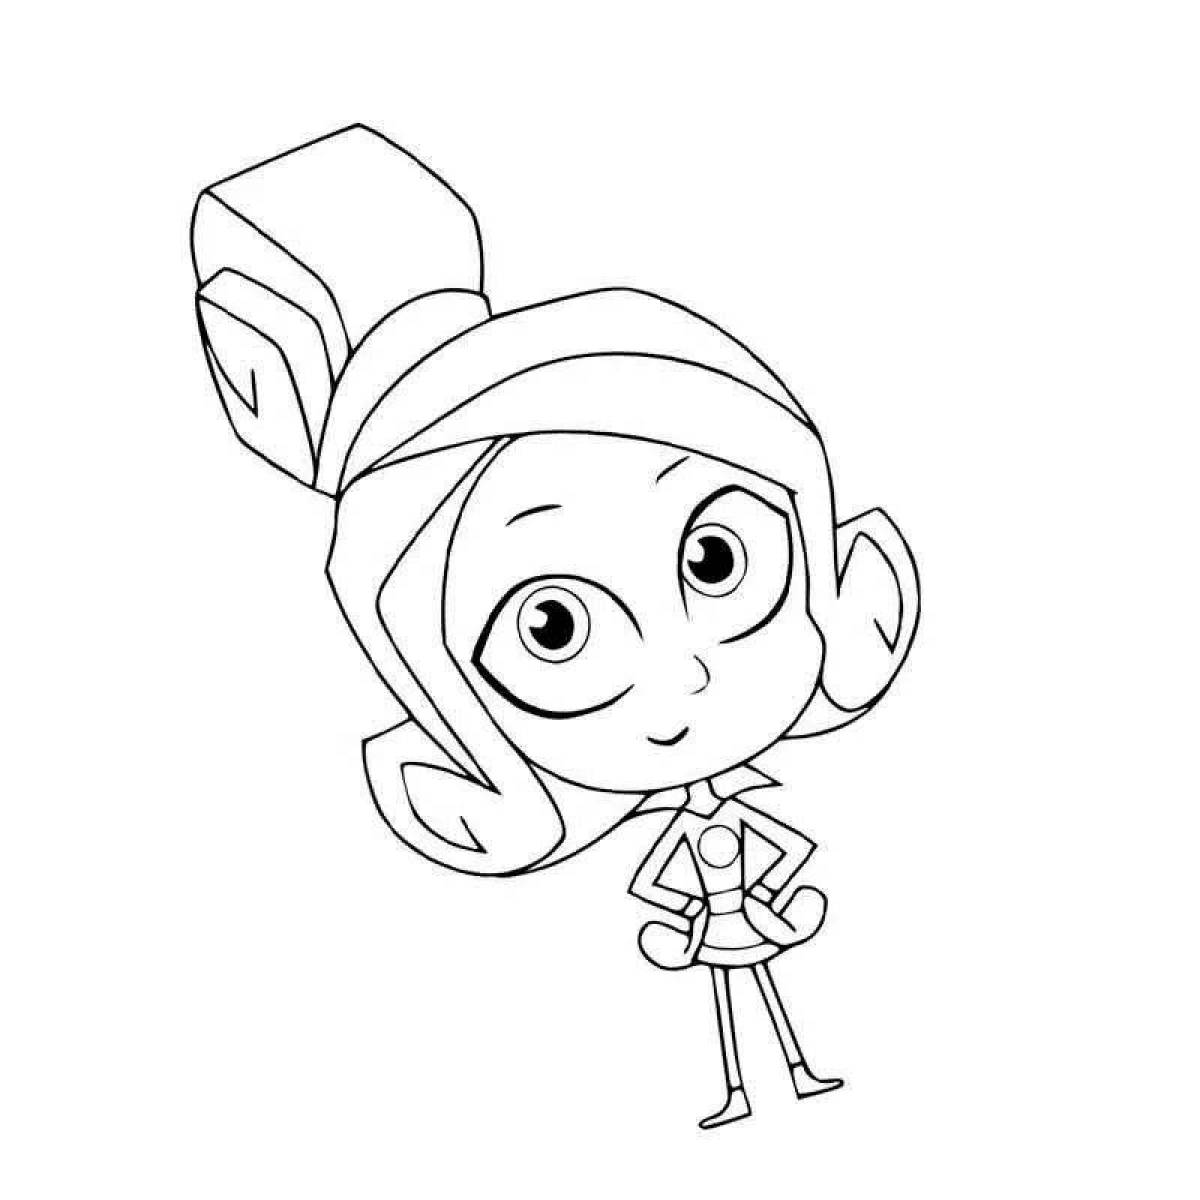 Holiday reel coloring page